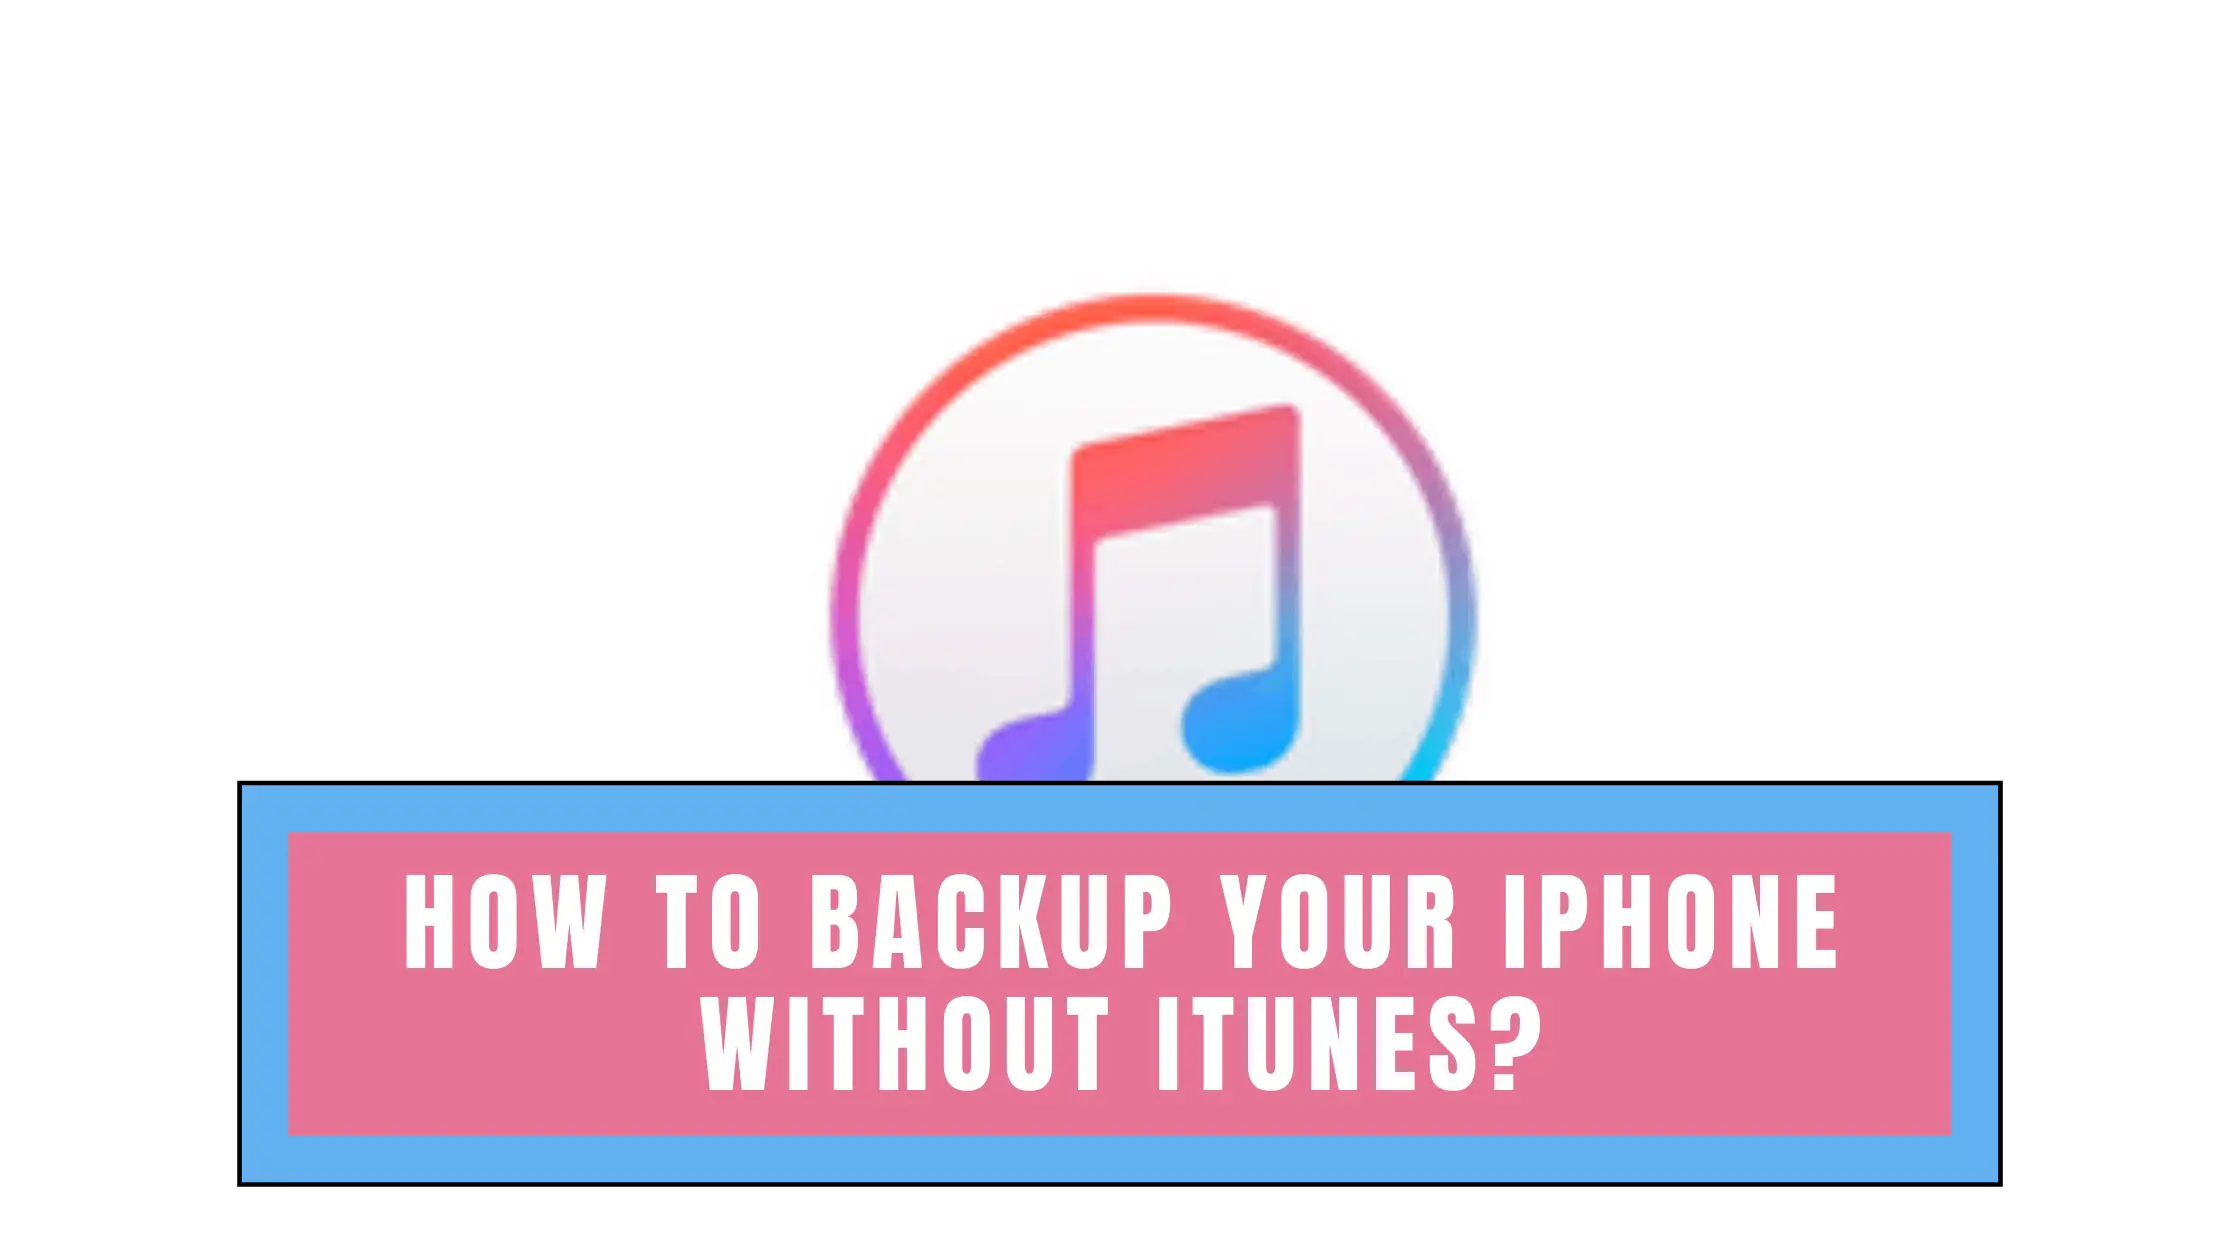 How To Backup Your iPhone Without iTunes